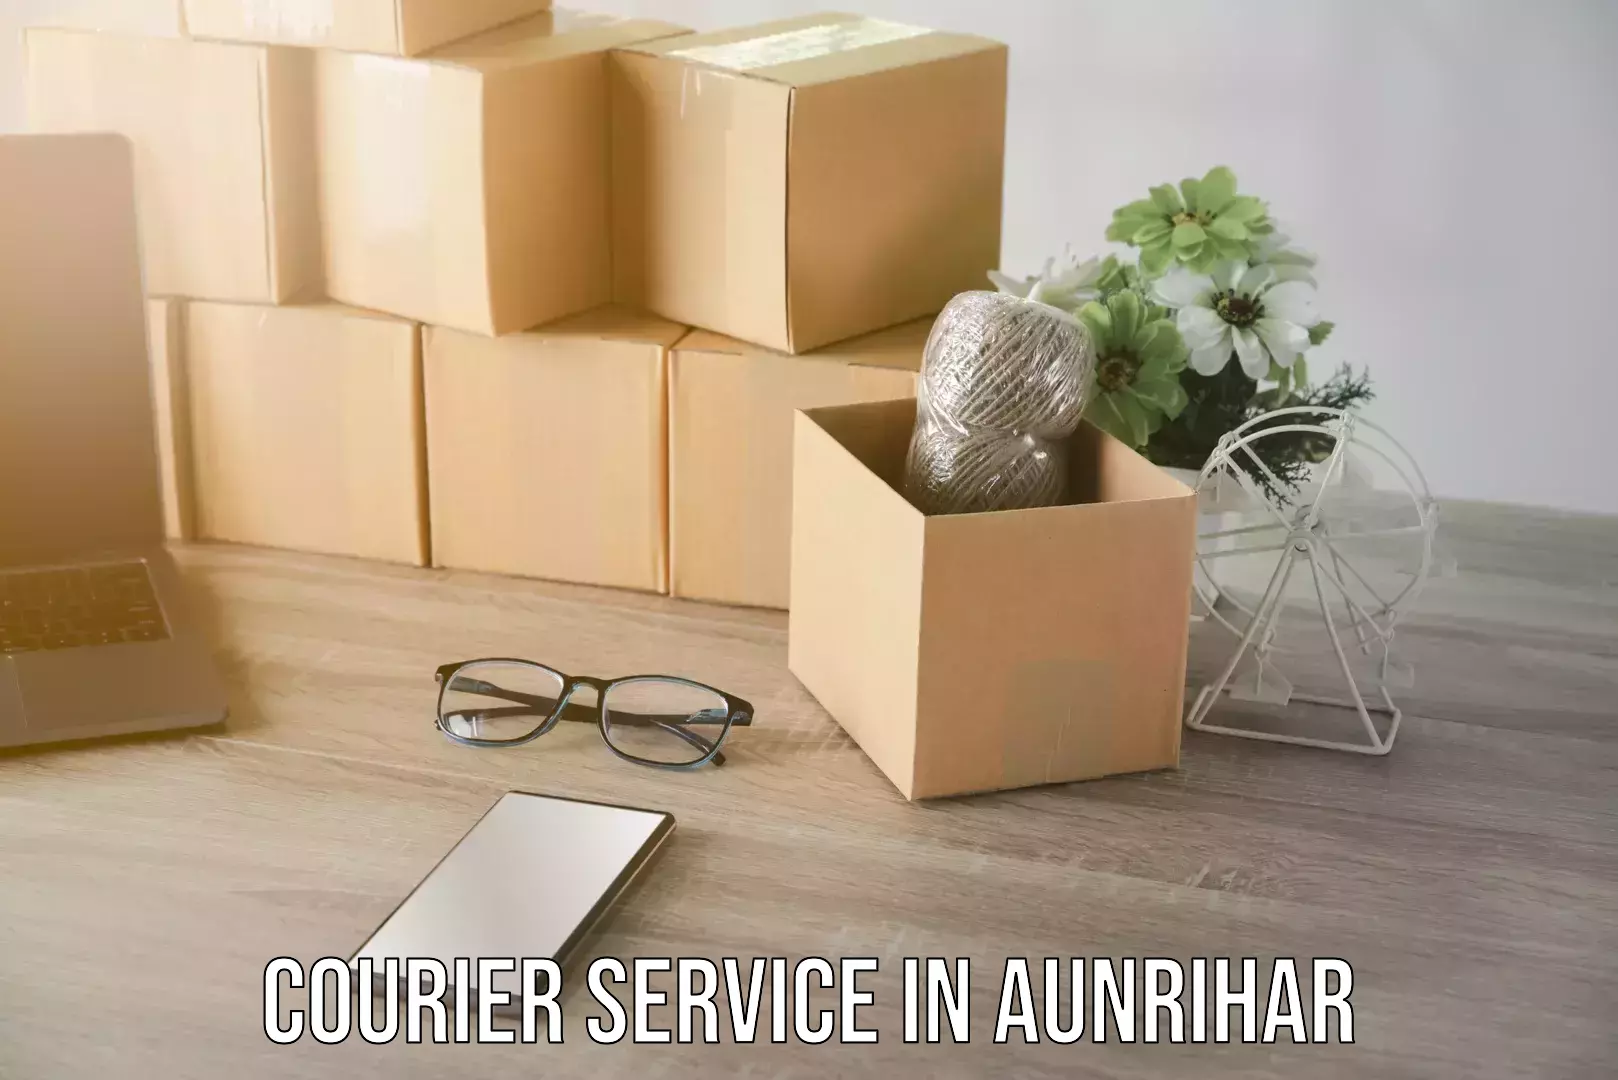 Automated shipping processes in Aunrihar